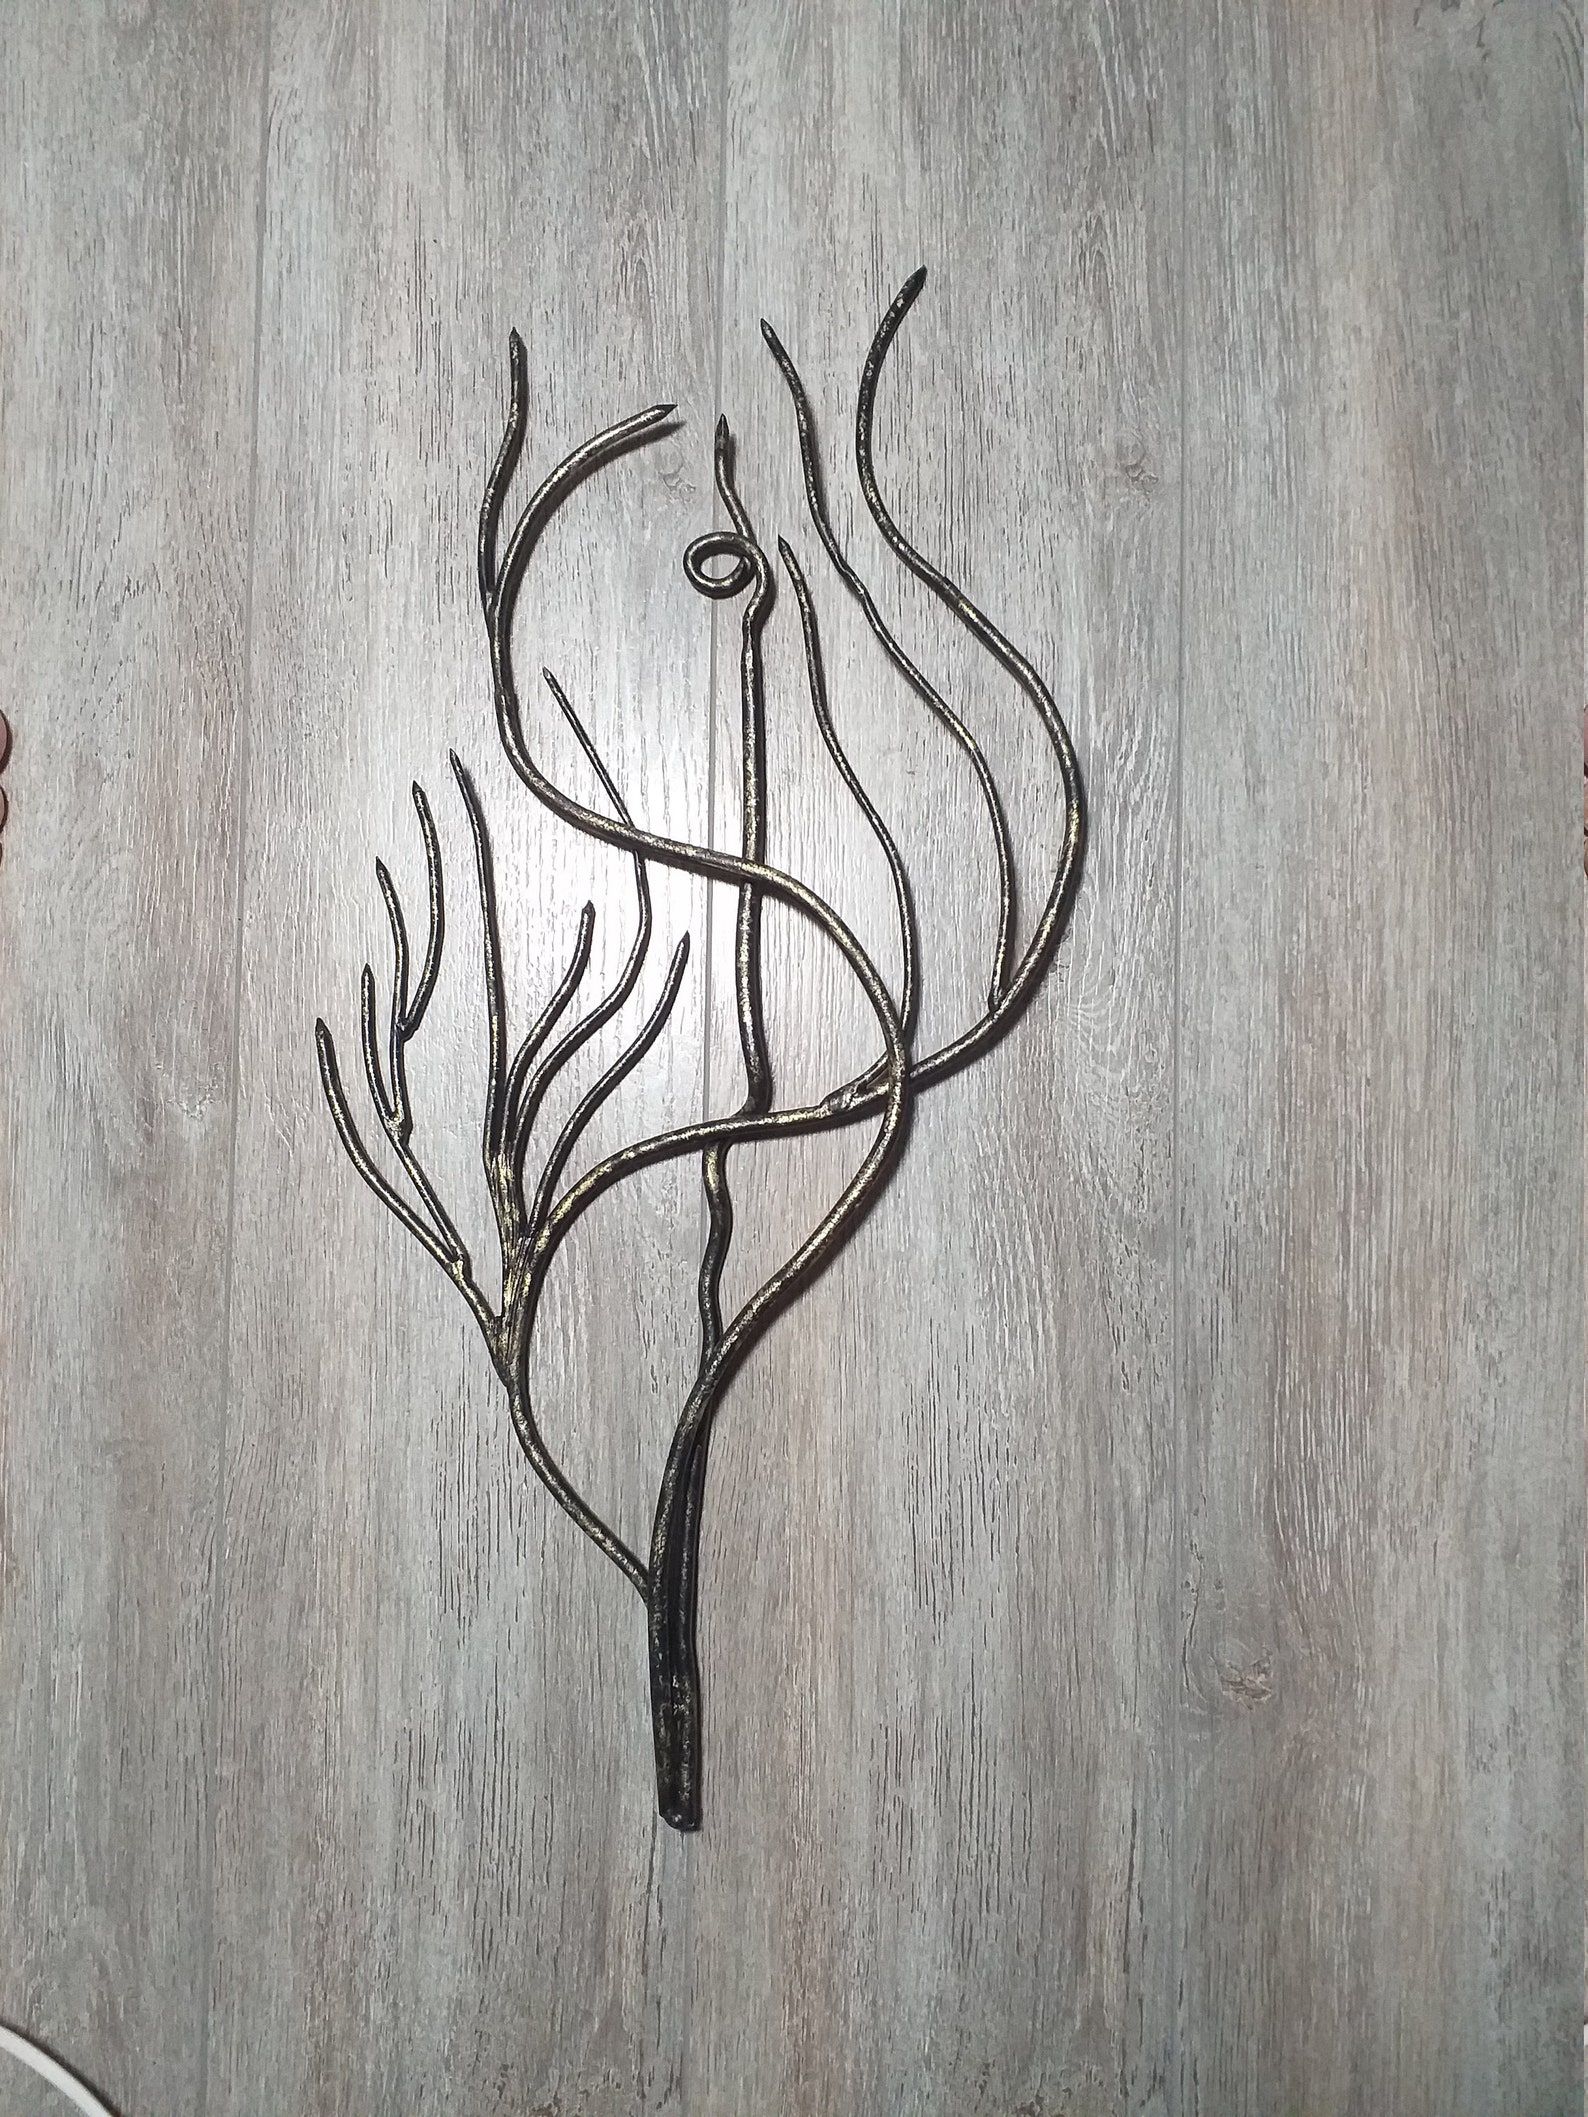 Metal Wall Decor Black Metal Twig Old Gold | Etsy With Regard To Most Popular Gold And Black Metal Wall Art (View 6 of 20)